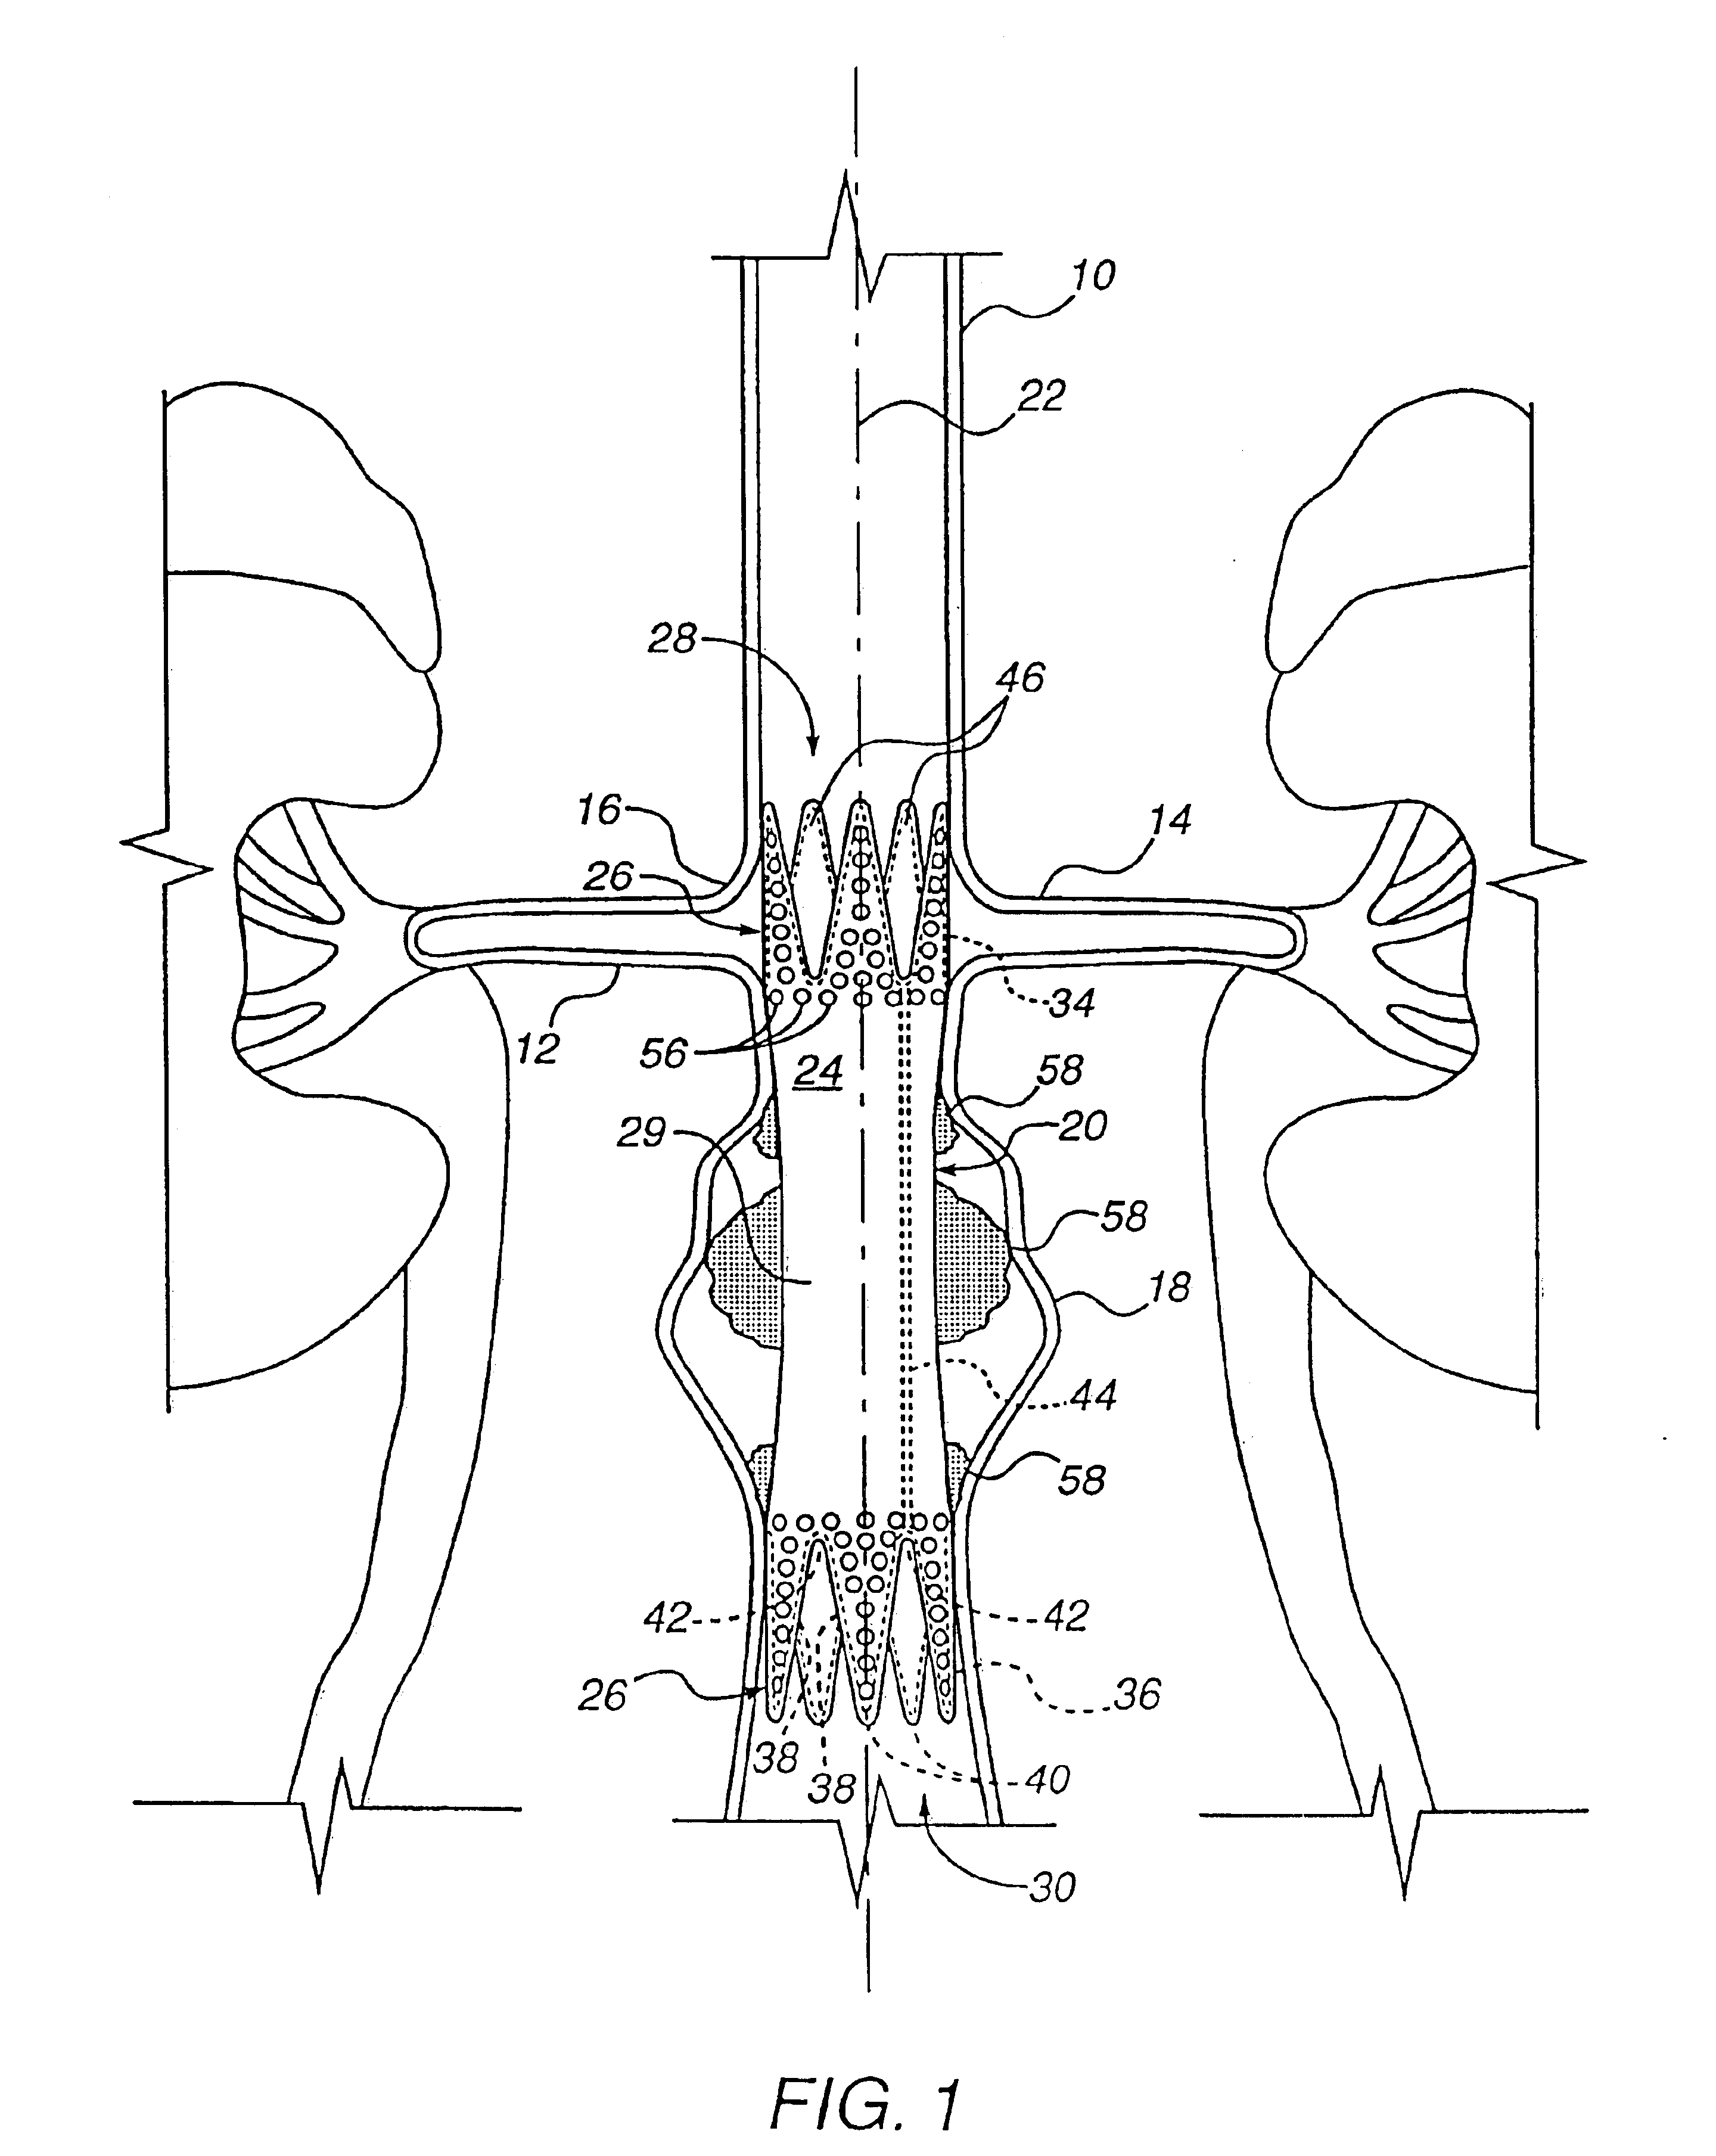 Method for engrafting a blood vessel